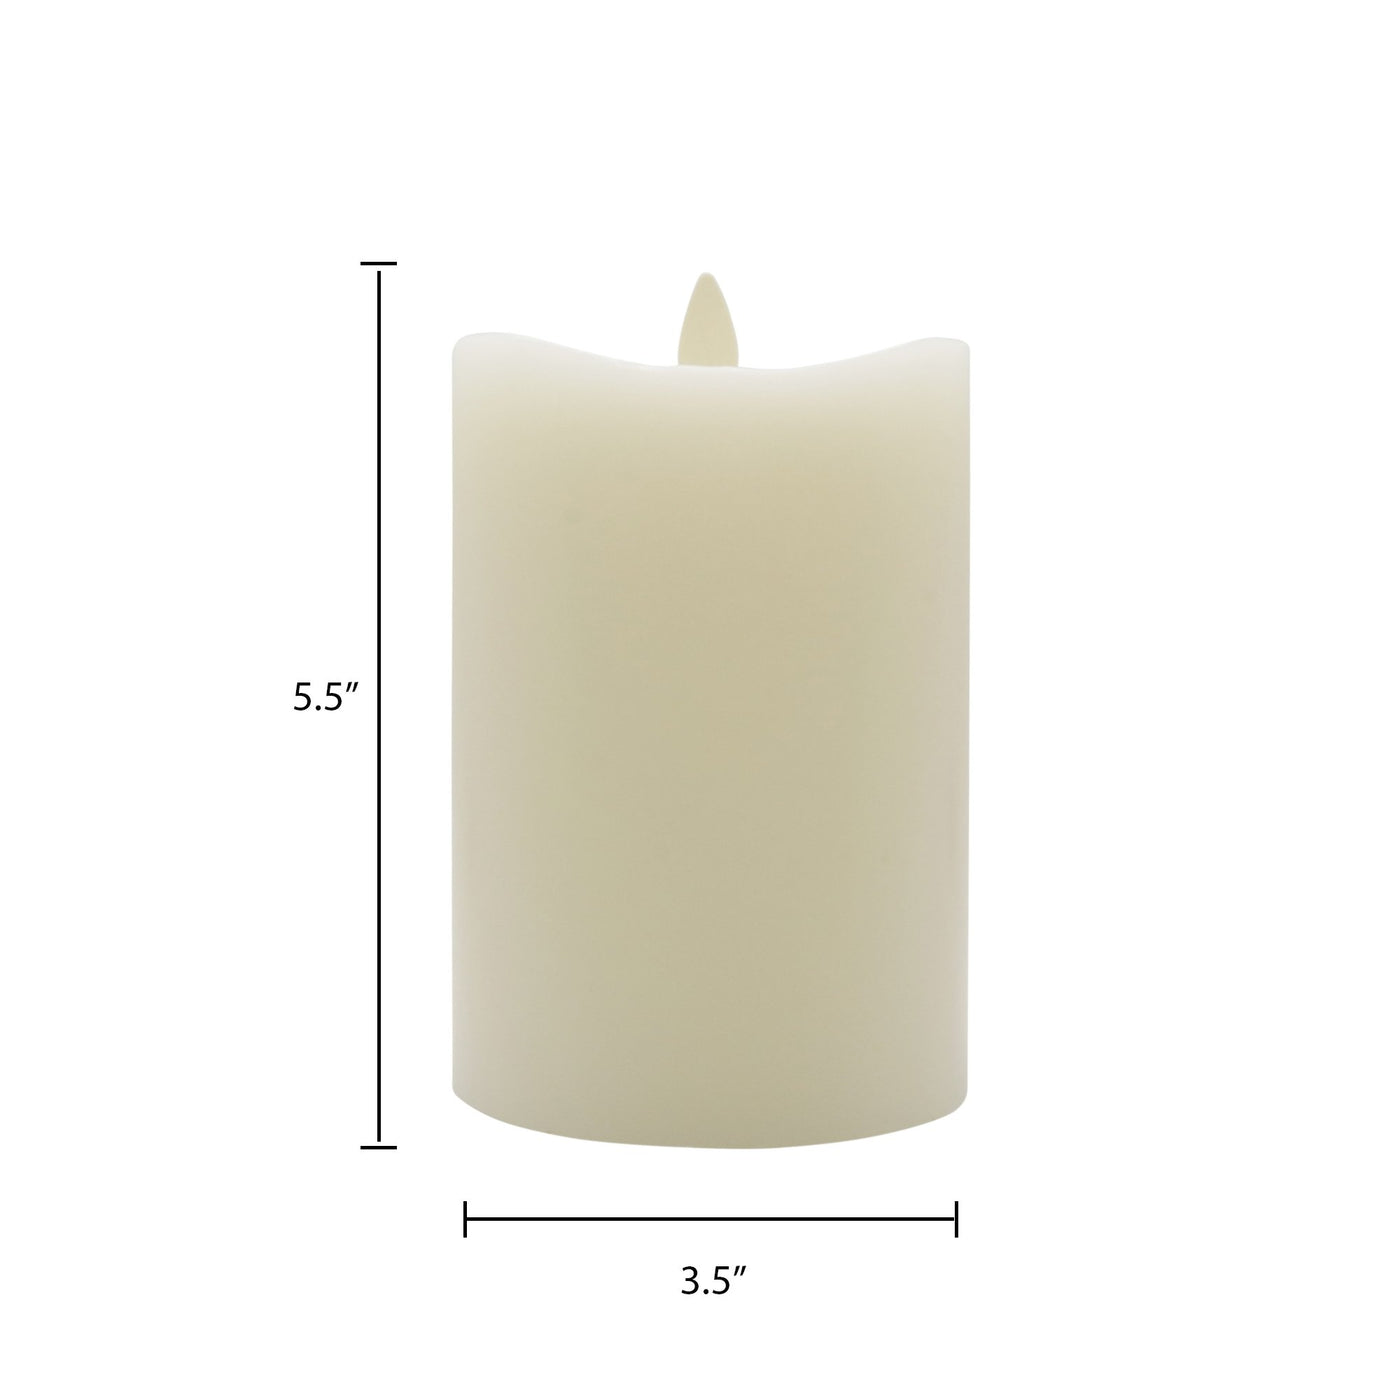 Matchless Candle Co. Indoor LED Candle - 7.6 x 14.0cm